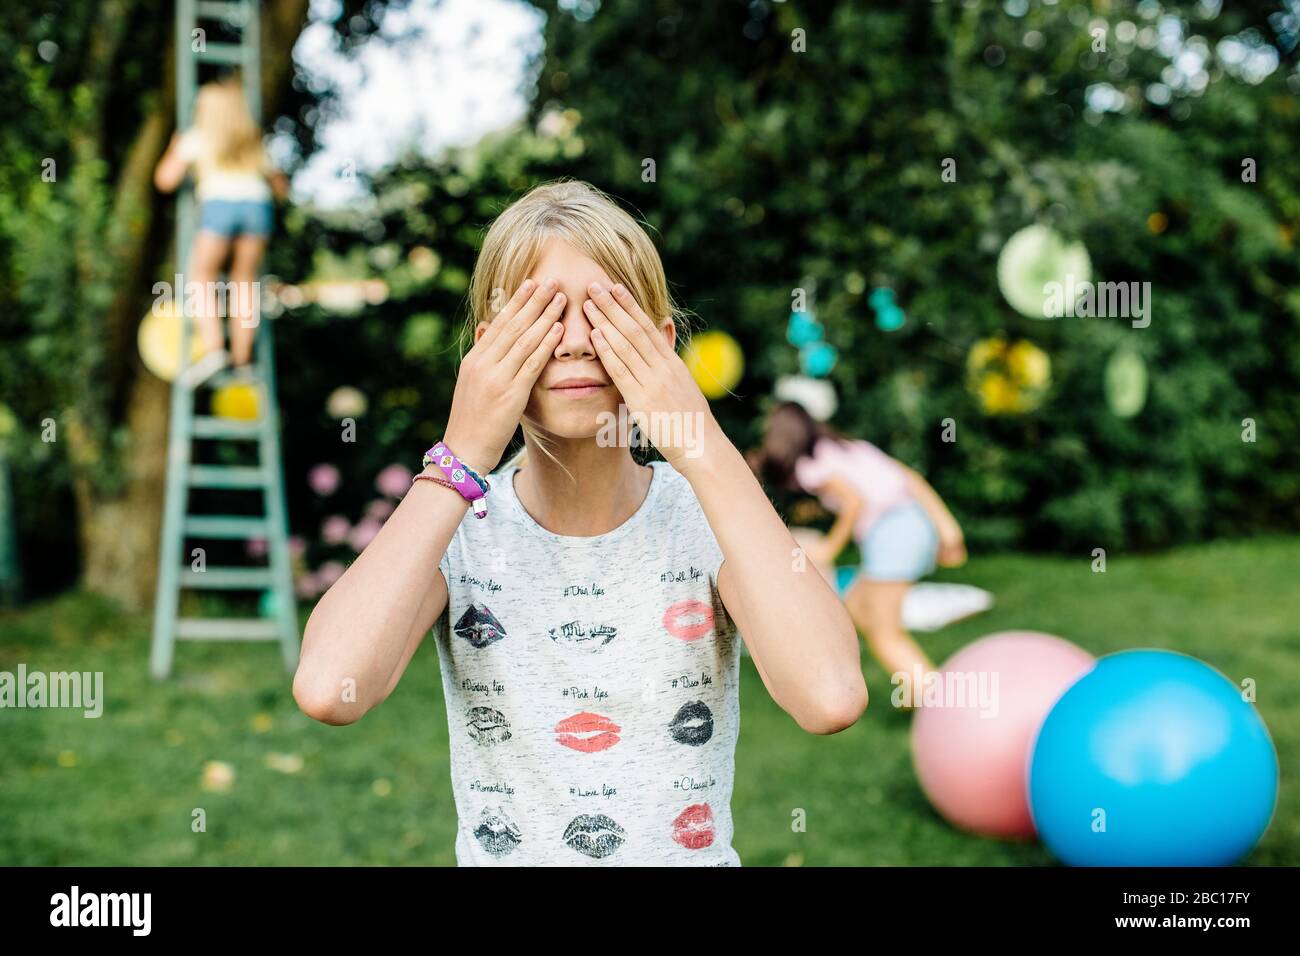 Girls playing hide and seek on a birthday party outdoors Stock Photo